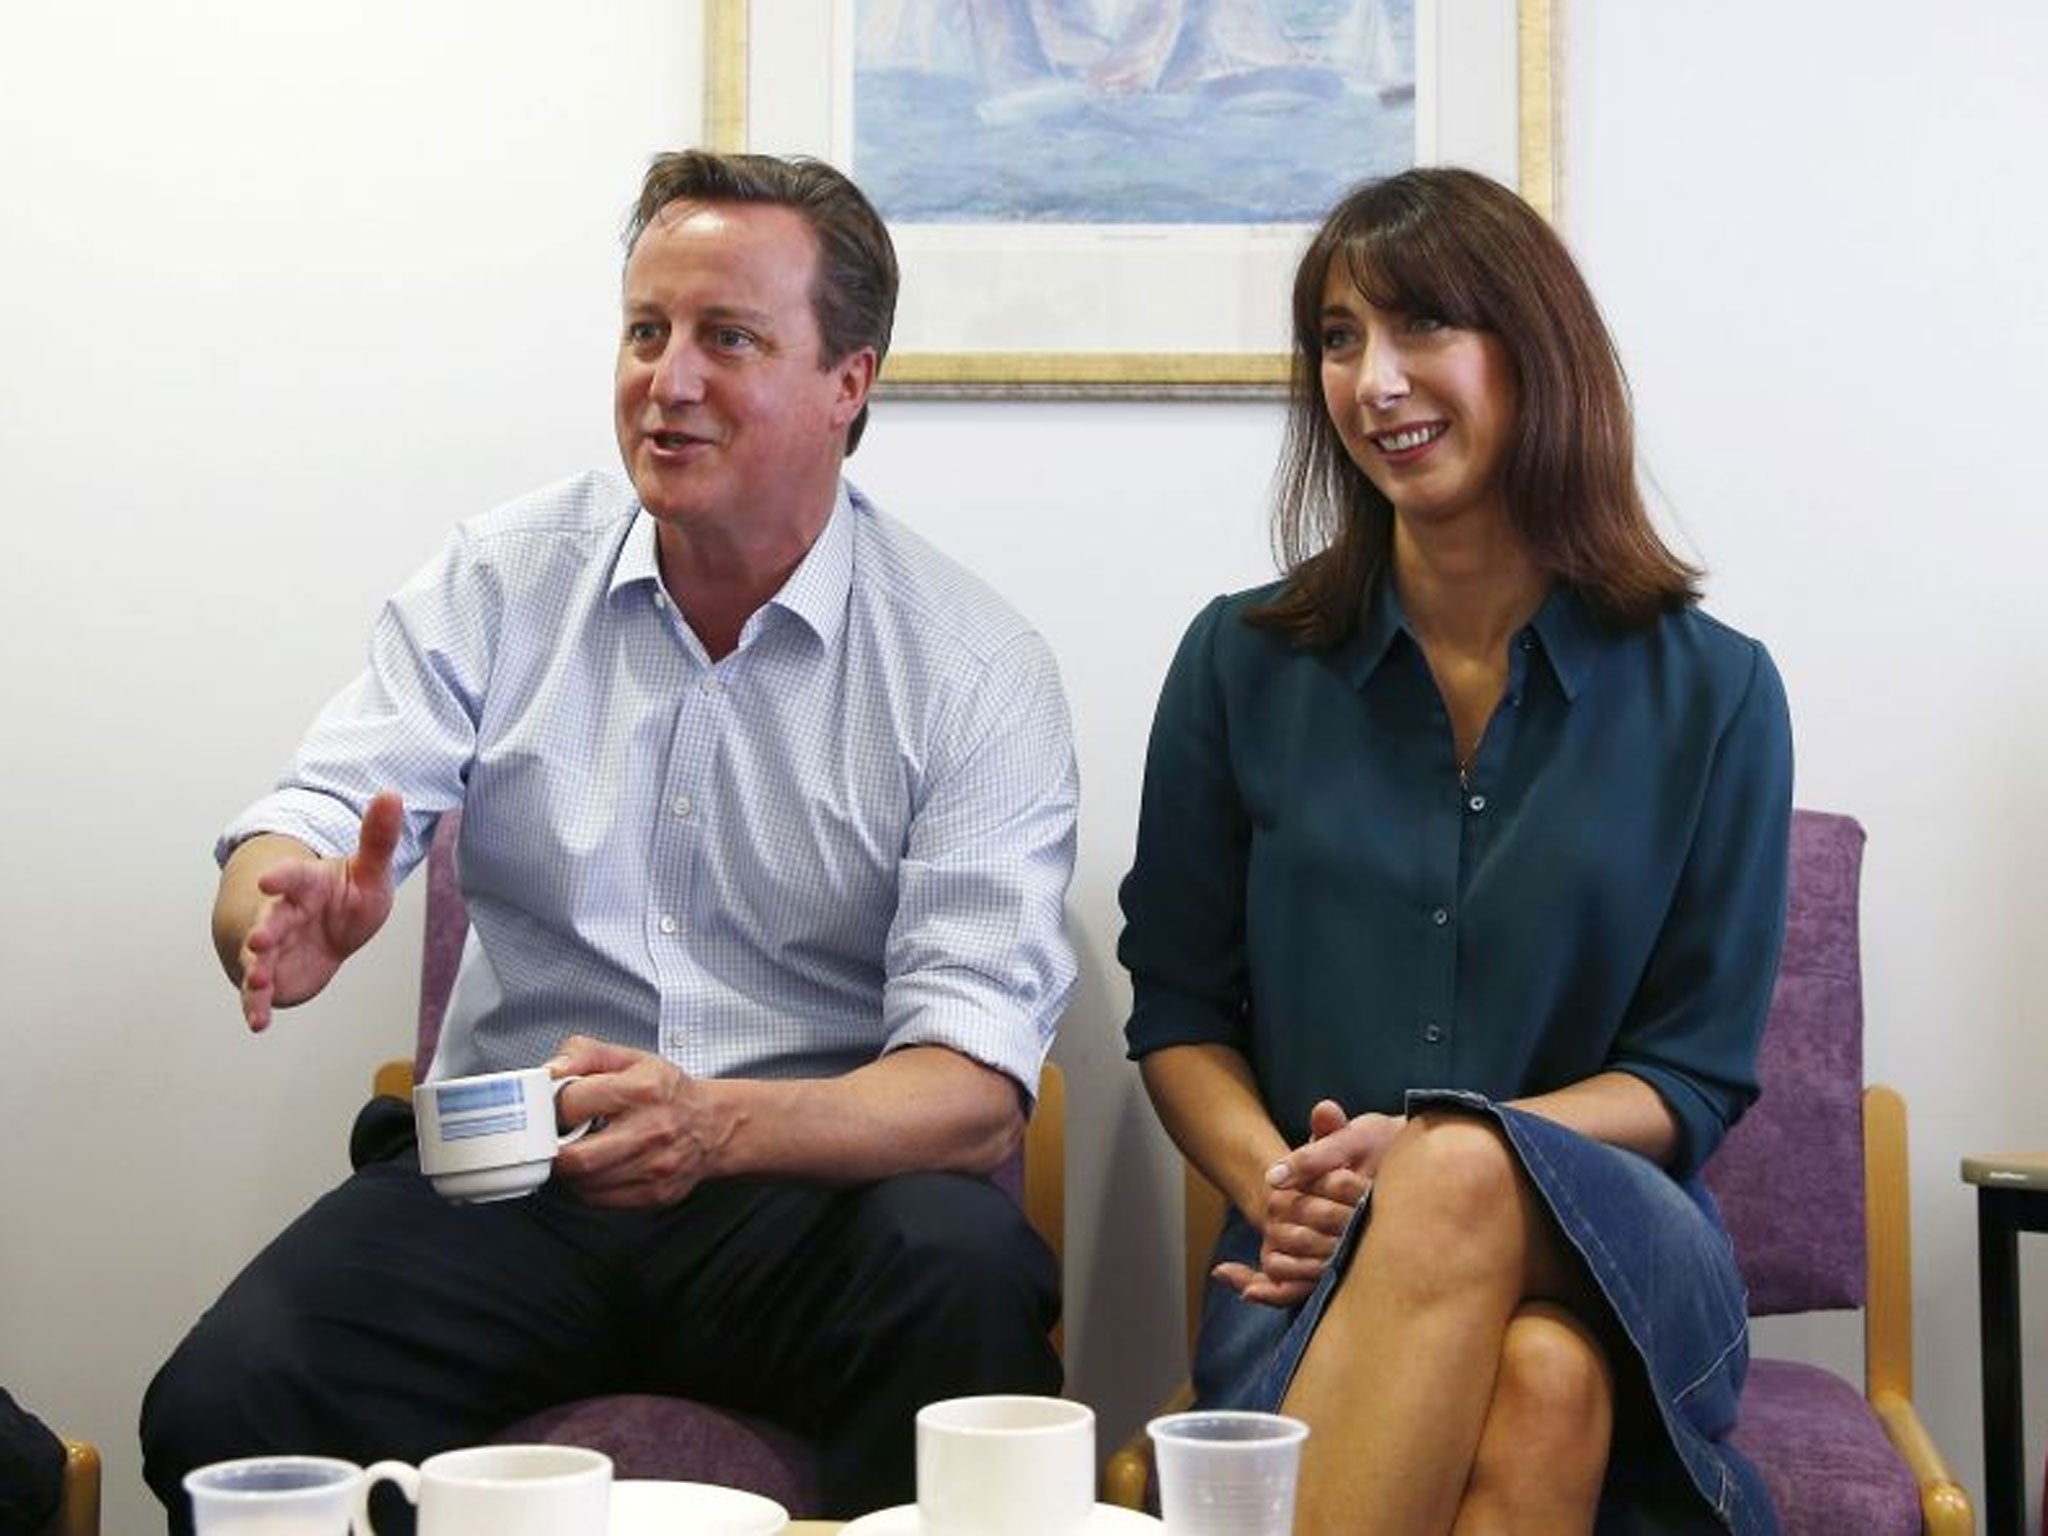 Reaching out: The Camerons in Oxford yesterday